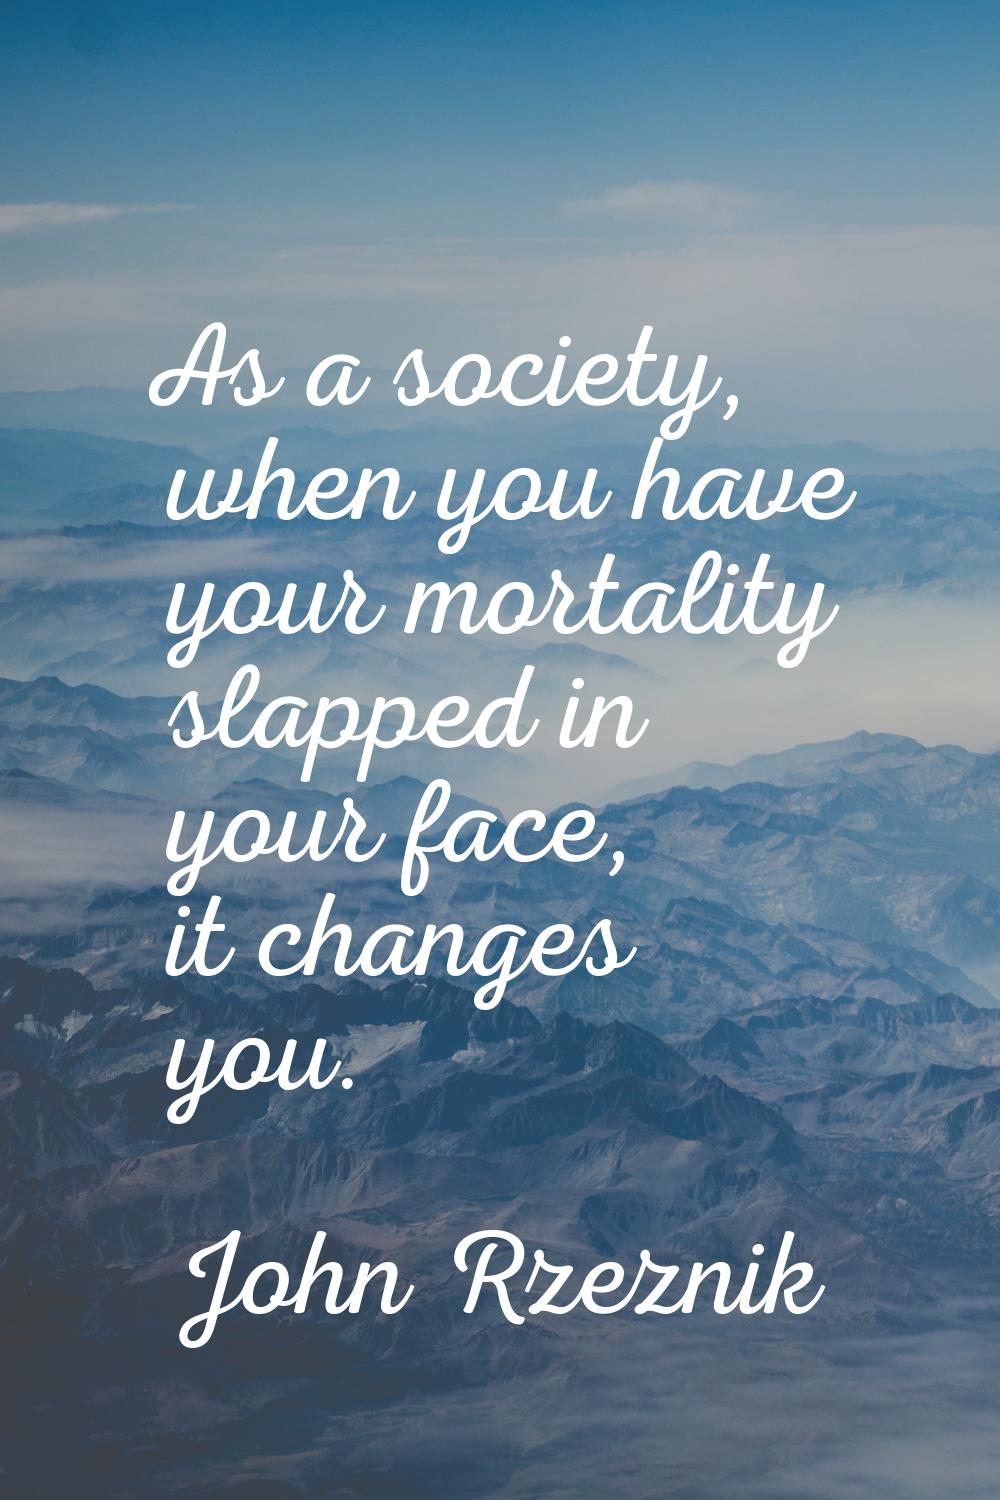 As a society, when you have your mortality slapped in your face, it changes you.